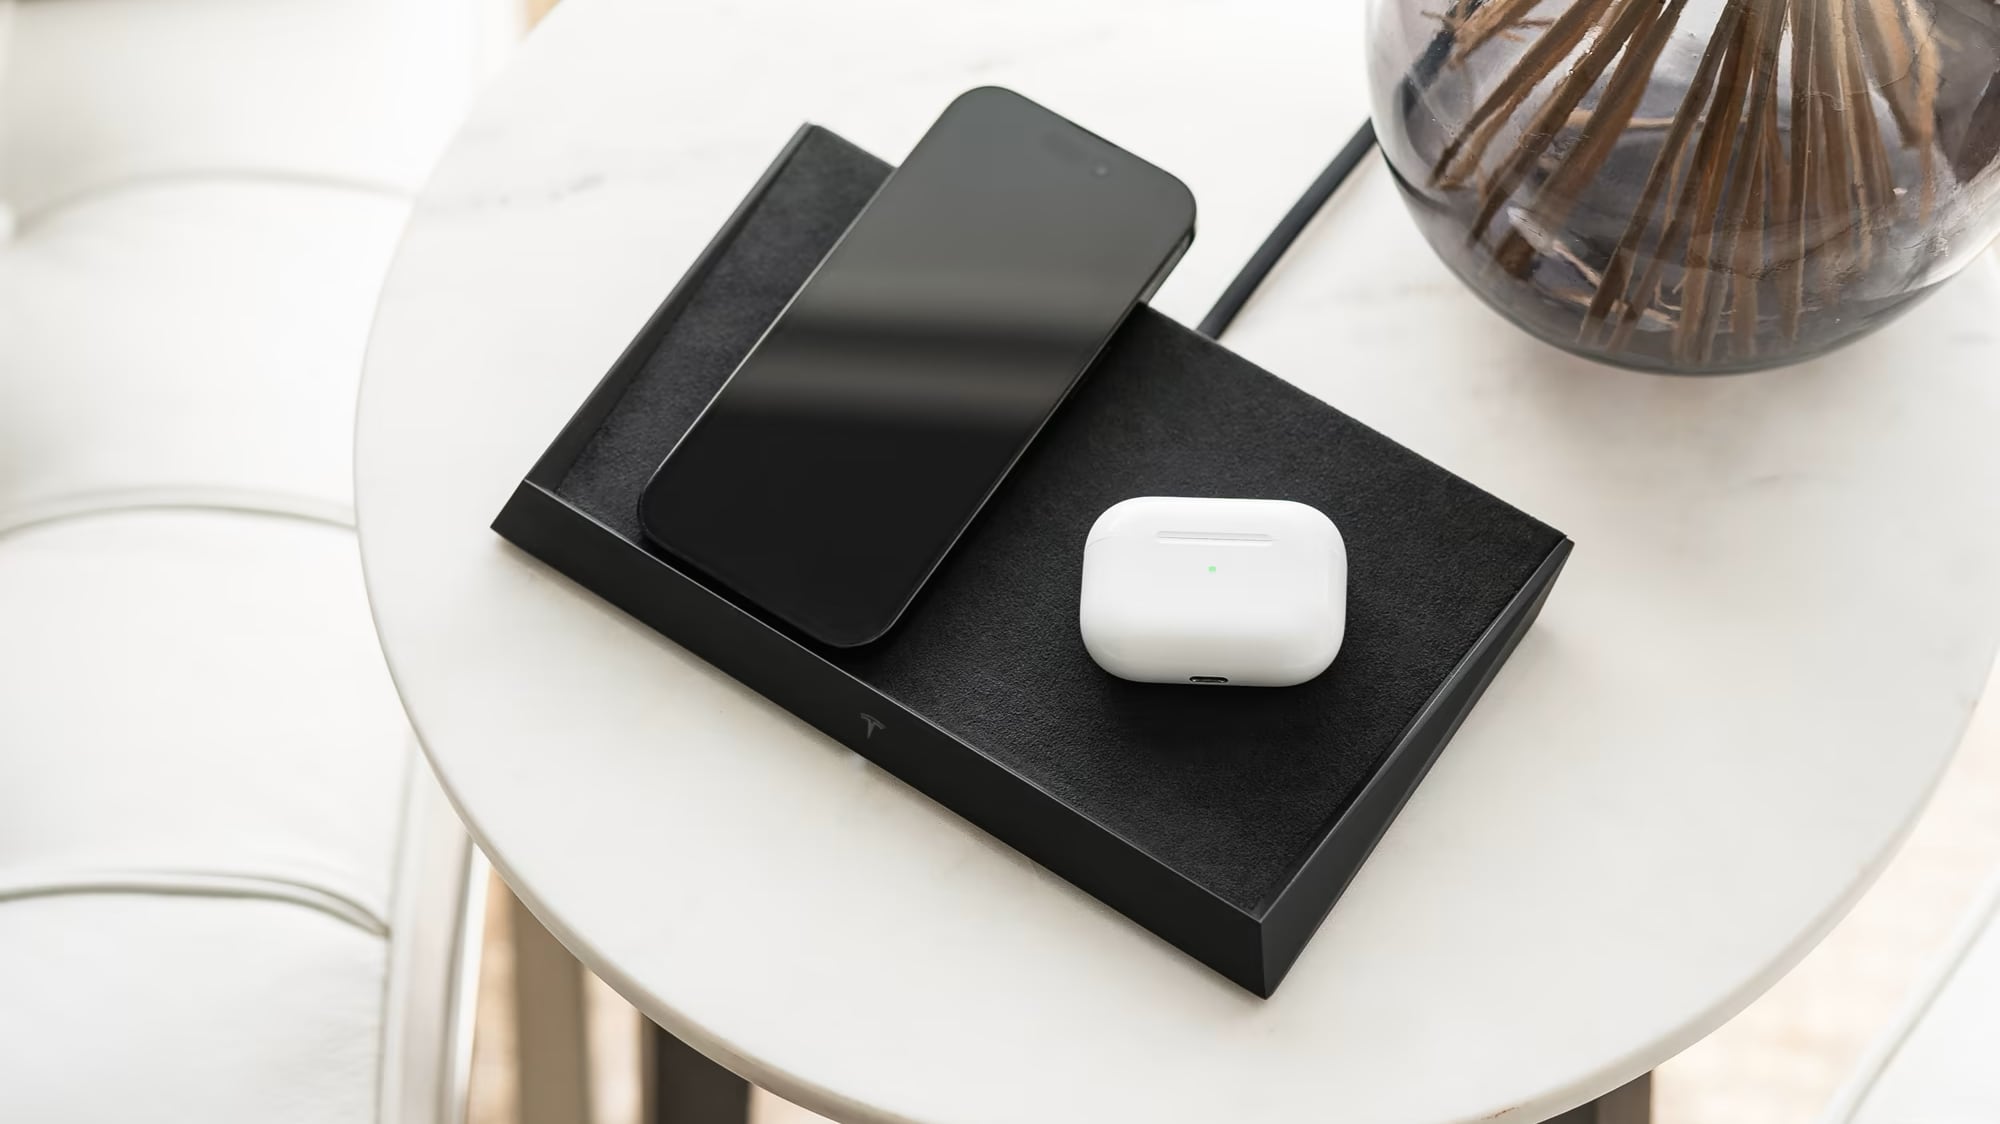 Tesla Launches $300 AirPower-Like Wireless Charger That Can Power Three Qi Devices at Once